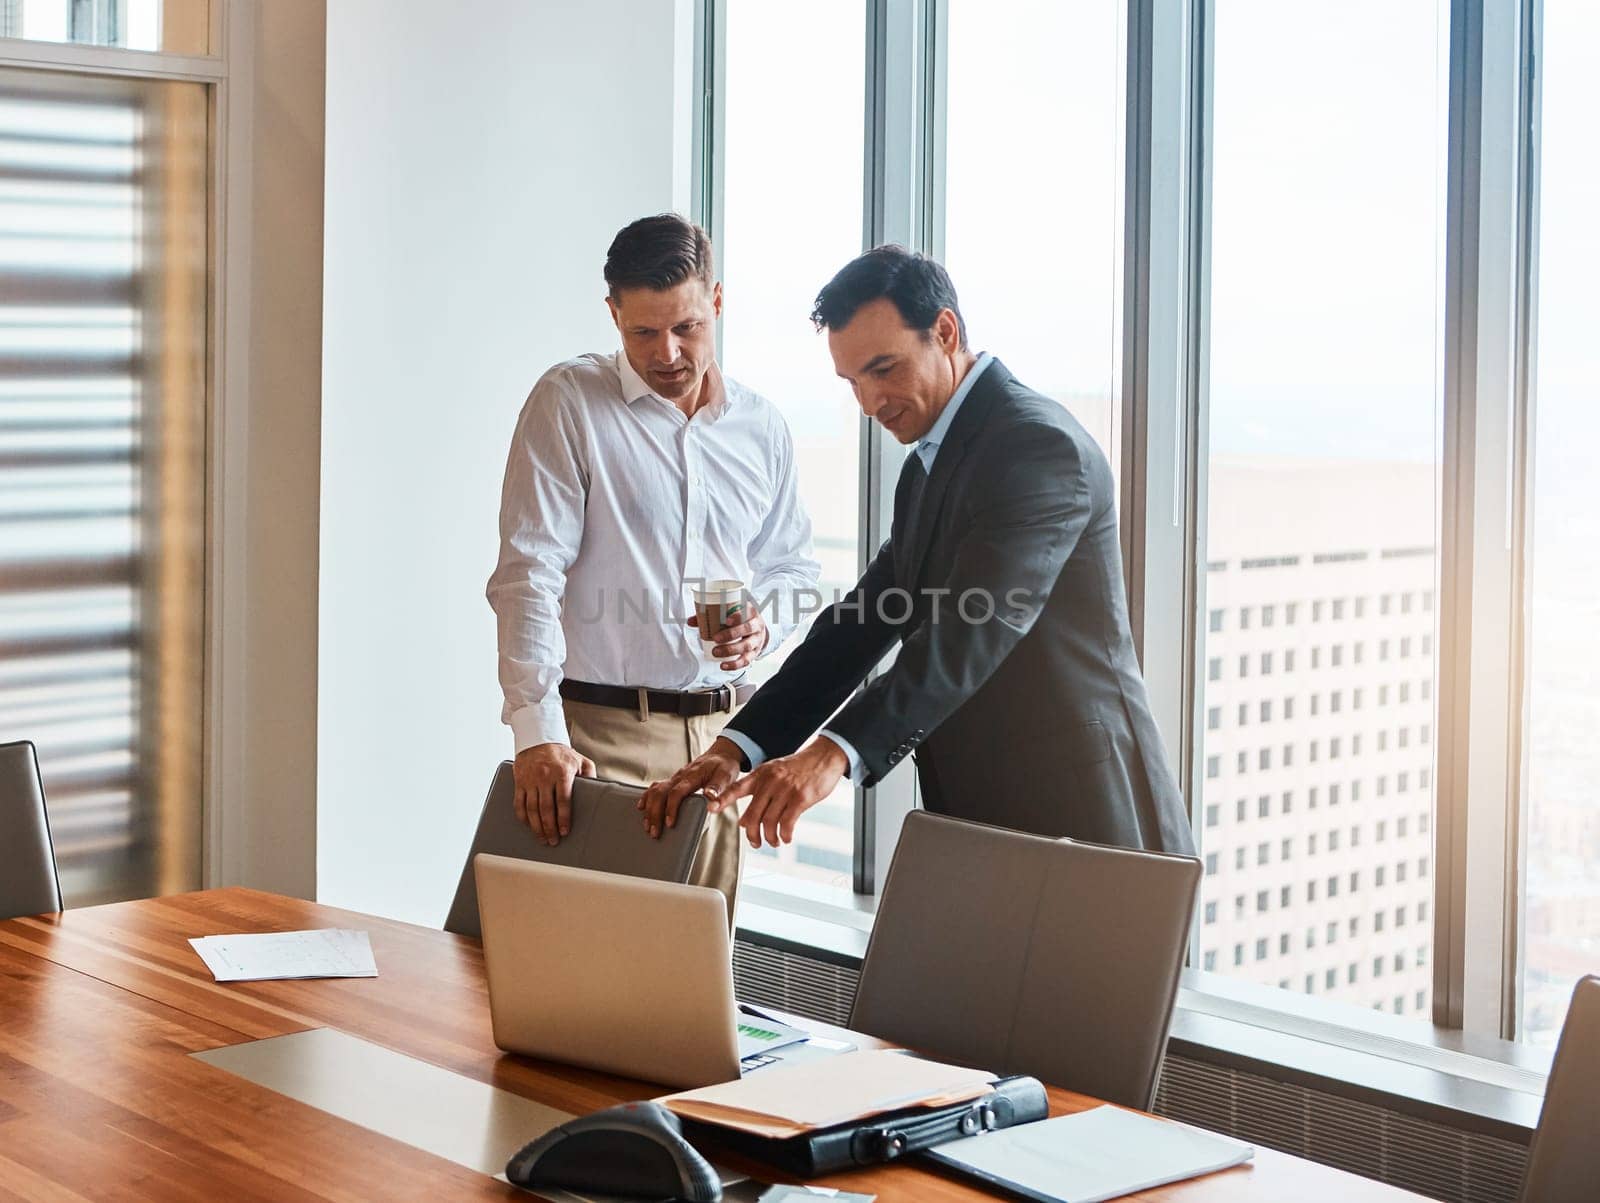 Technology makes succeeding so much easier. mature businessmen working in a corporate office